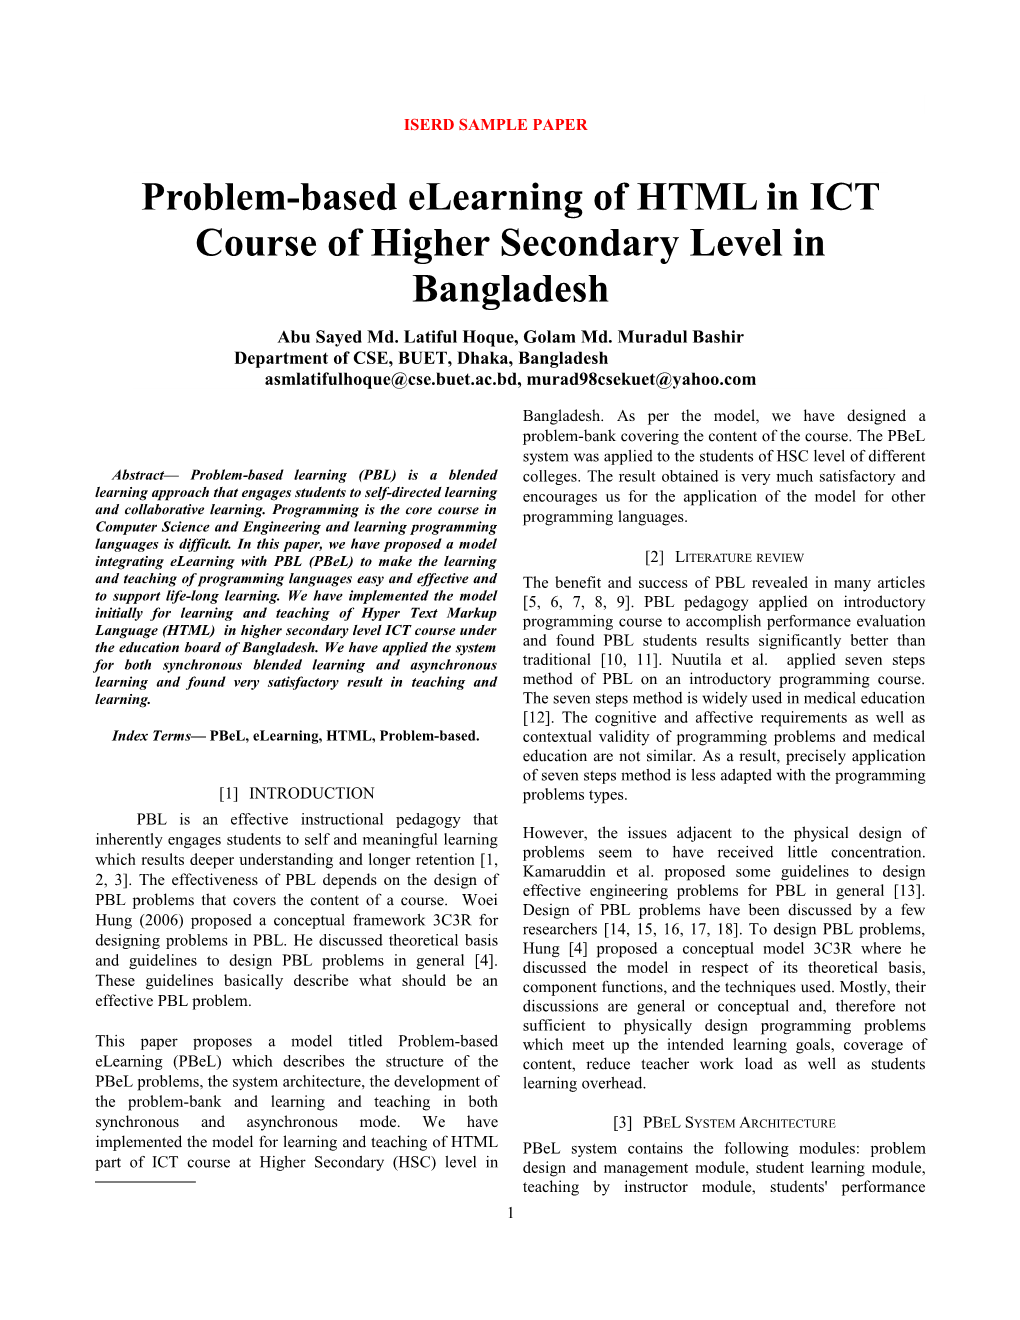 Problem-Based Elearning of HTML in ICT Course of Higher Secondary Level in Bangladesh